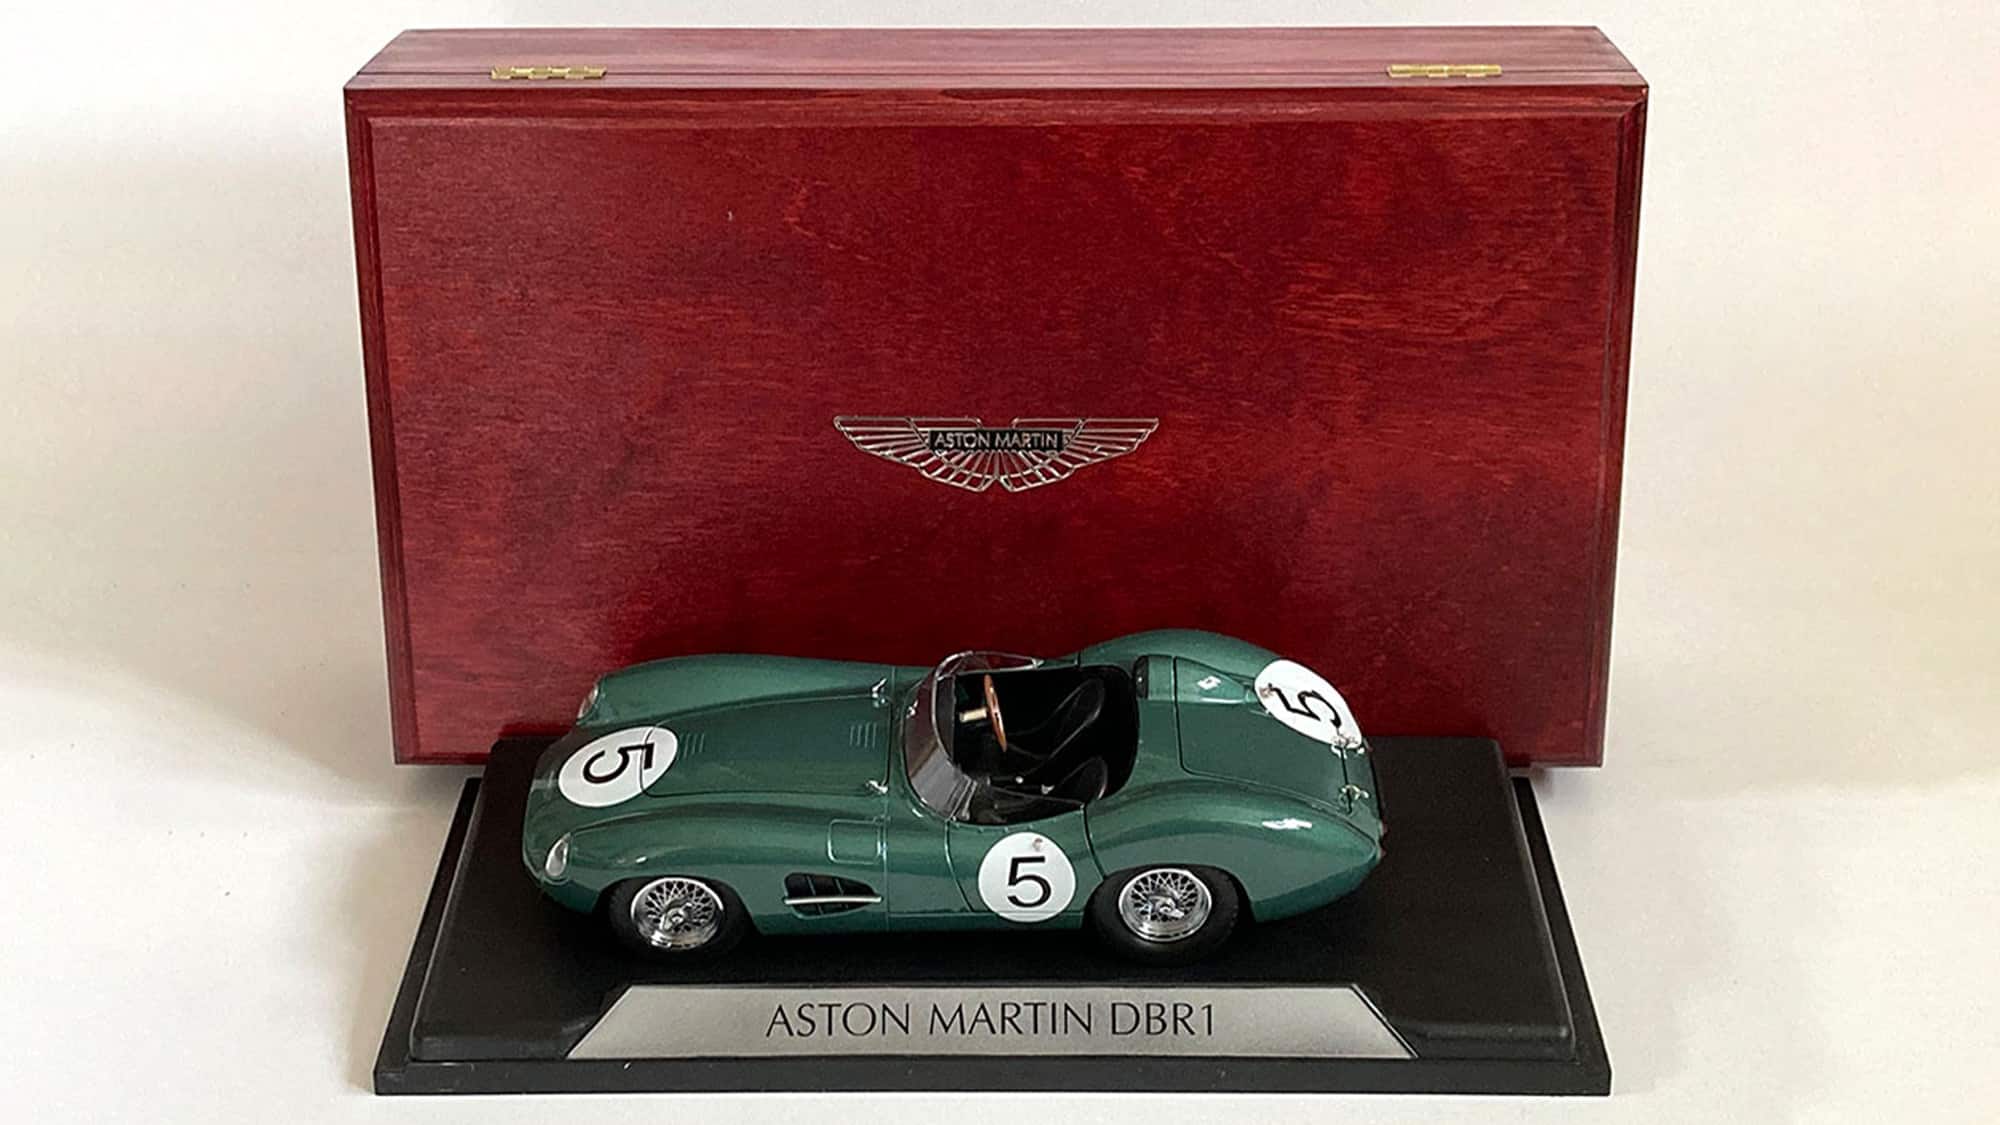 Shelby signed DBR1